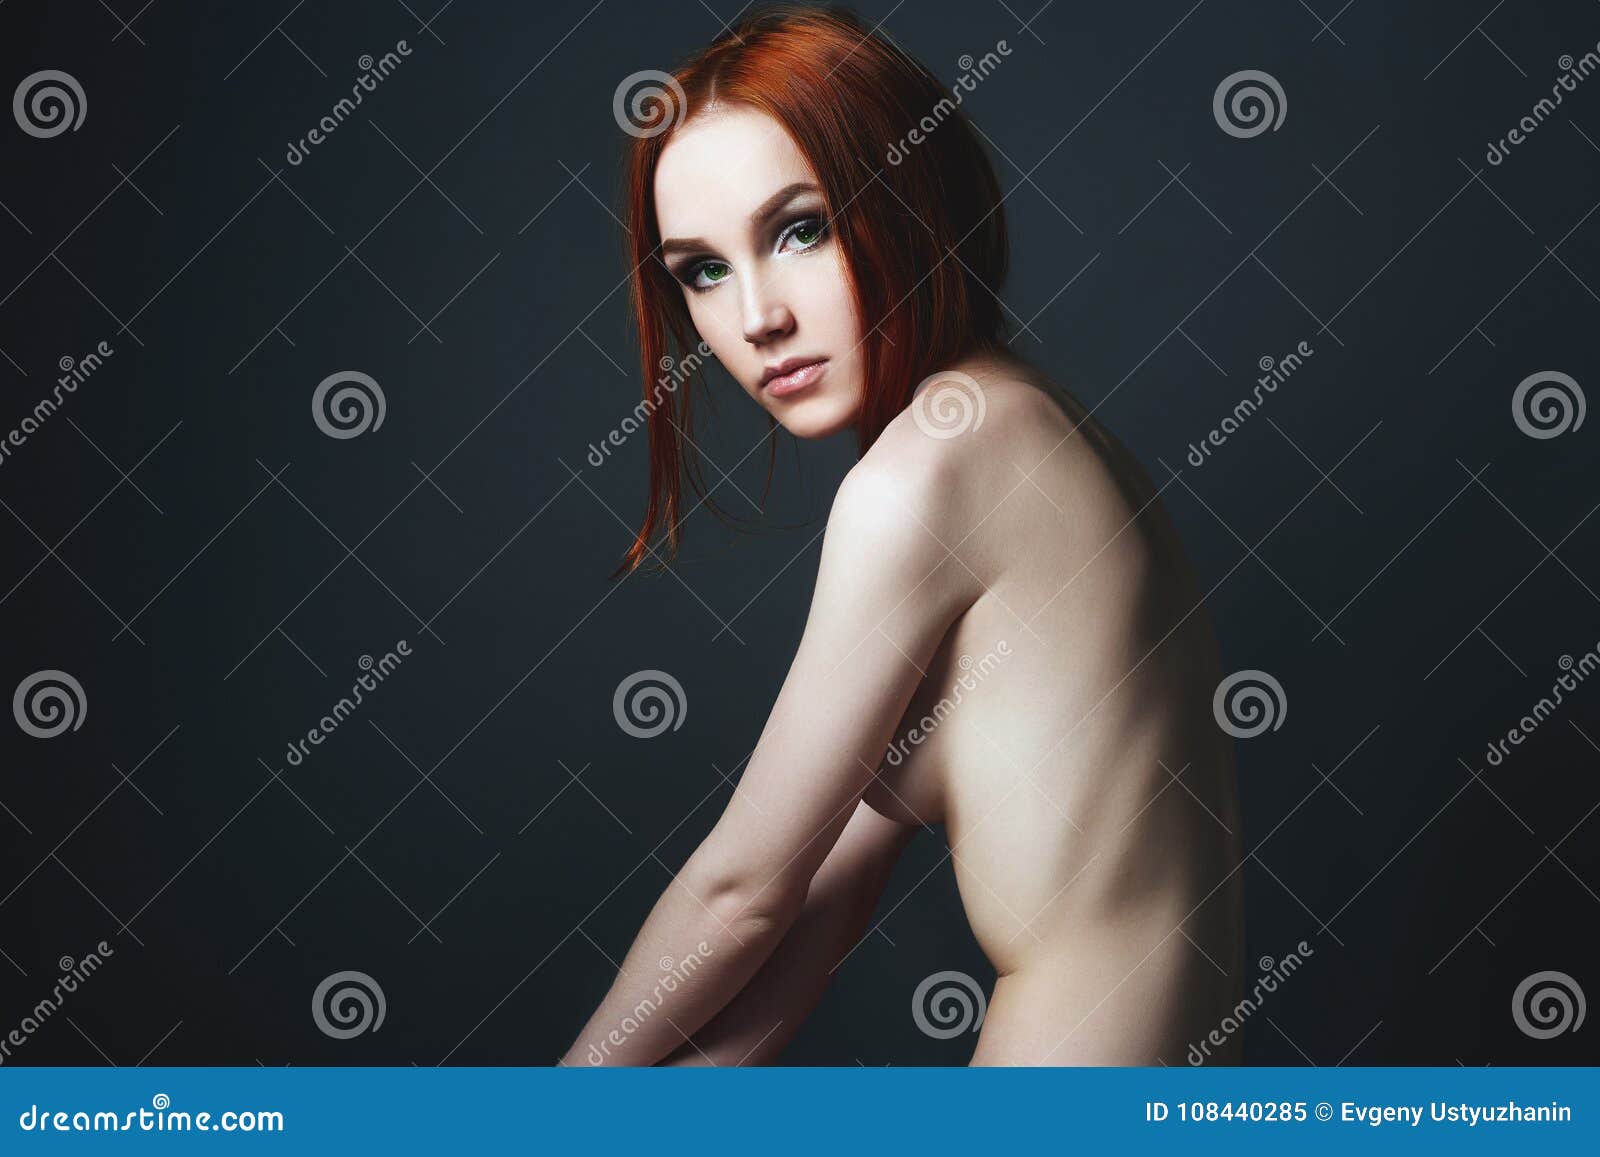 dhanraj jagtap recommends sexy nude ginger women pic